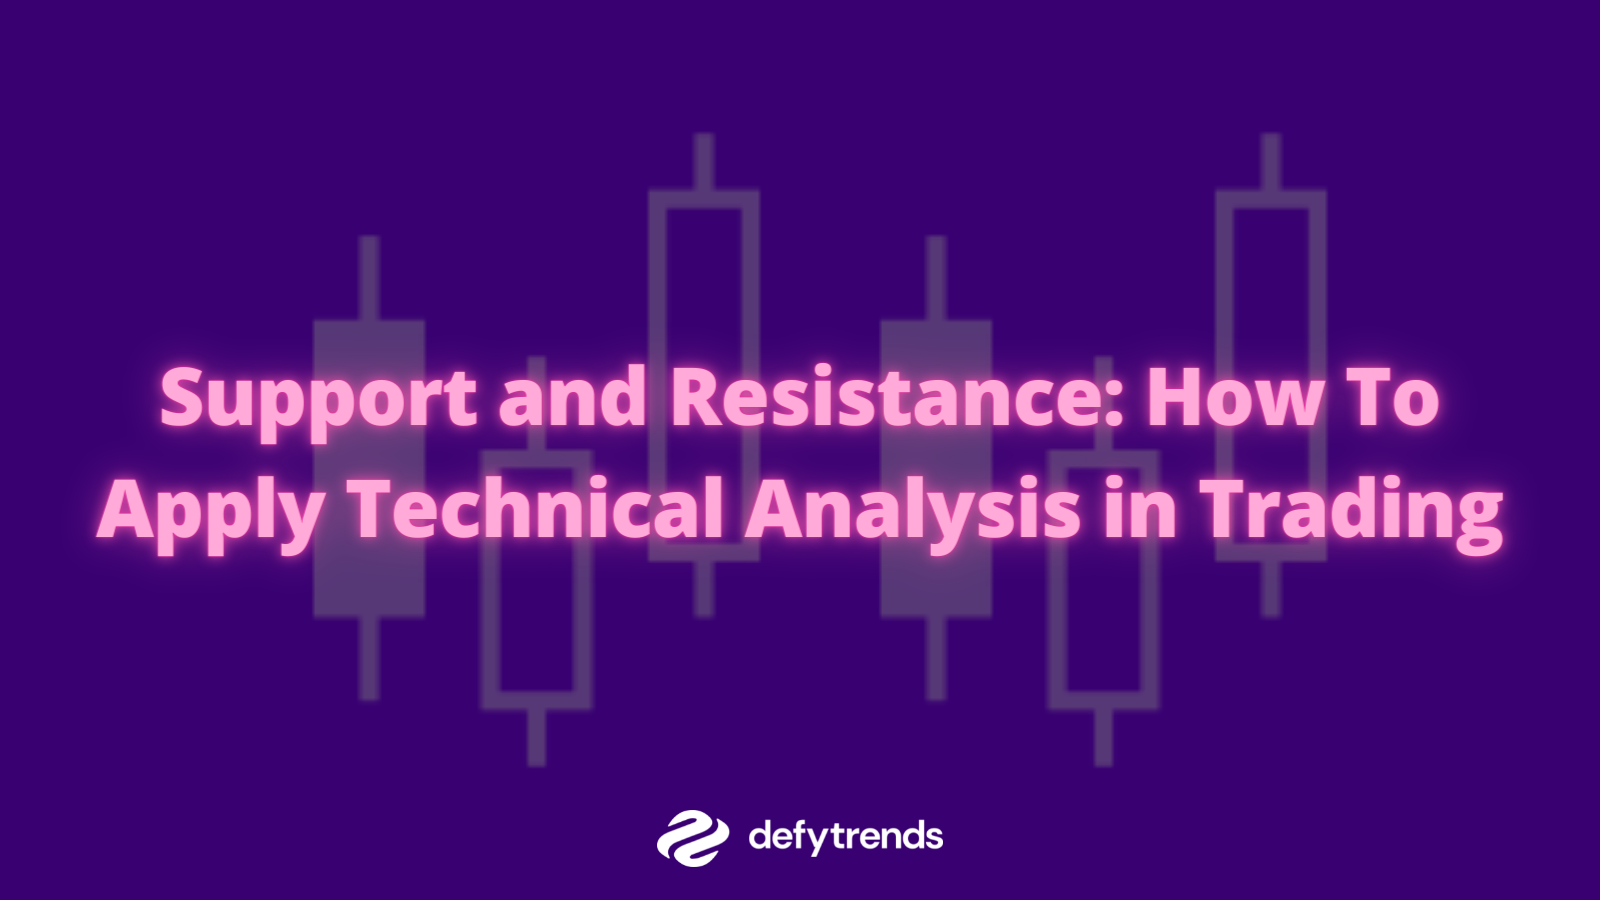 Support and Resistance: How To Apply Technical Analysis in Trading